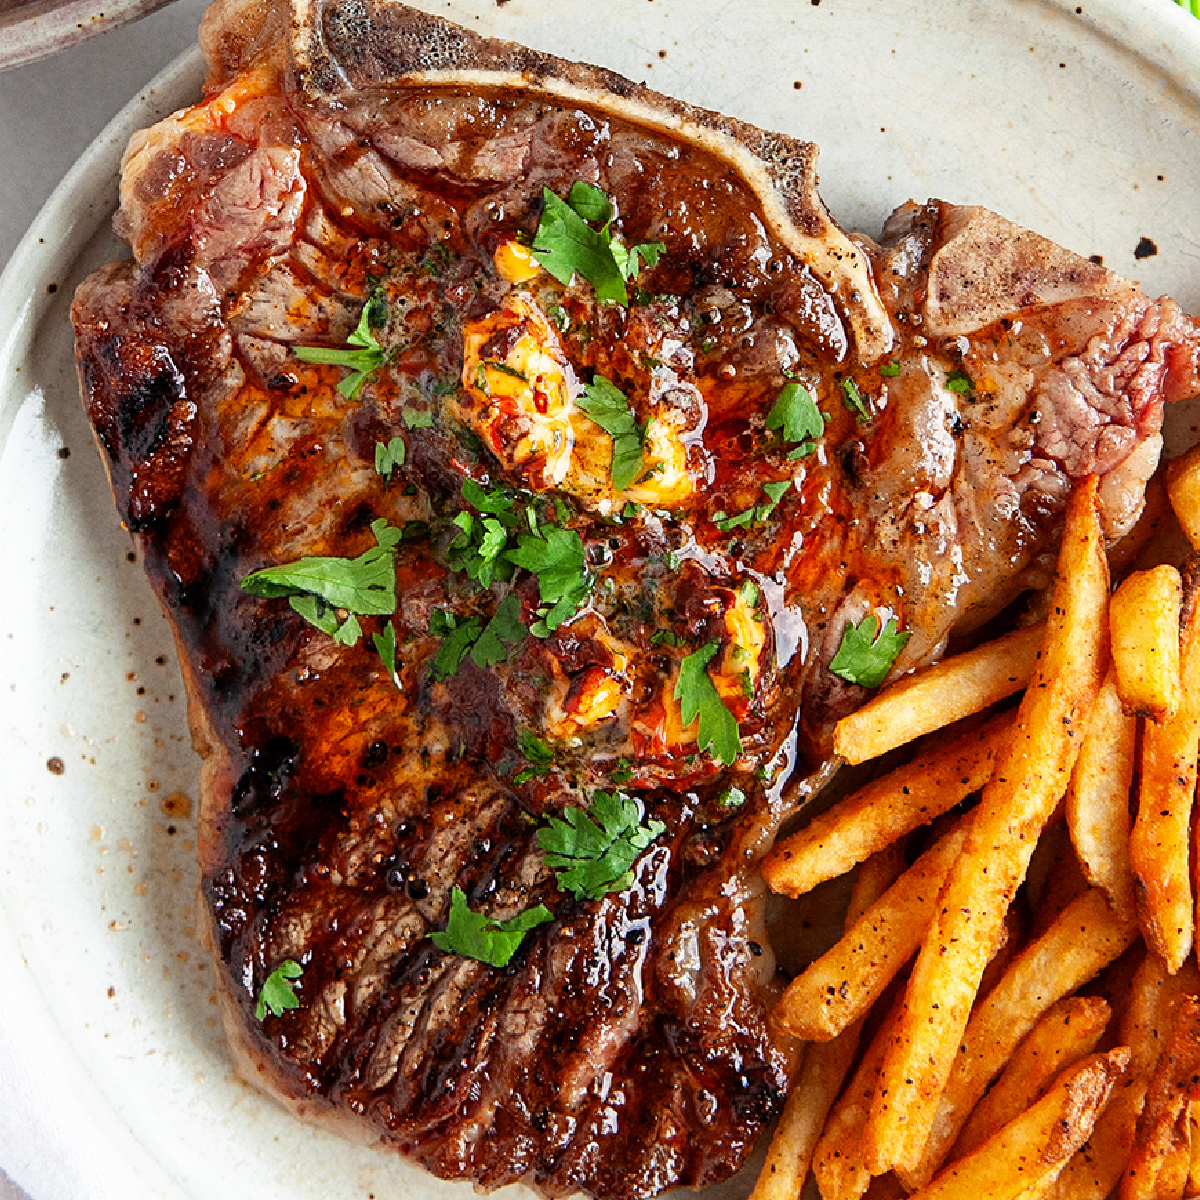 Grilled t-bone steak with chipotle cilantro butter on a plate with crispy fries.